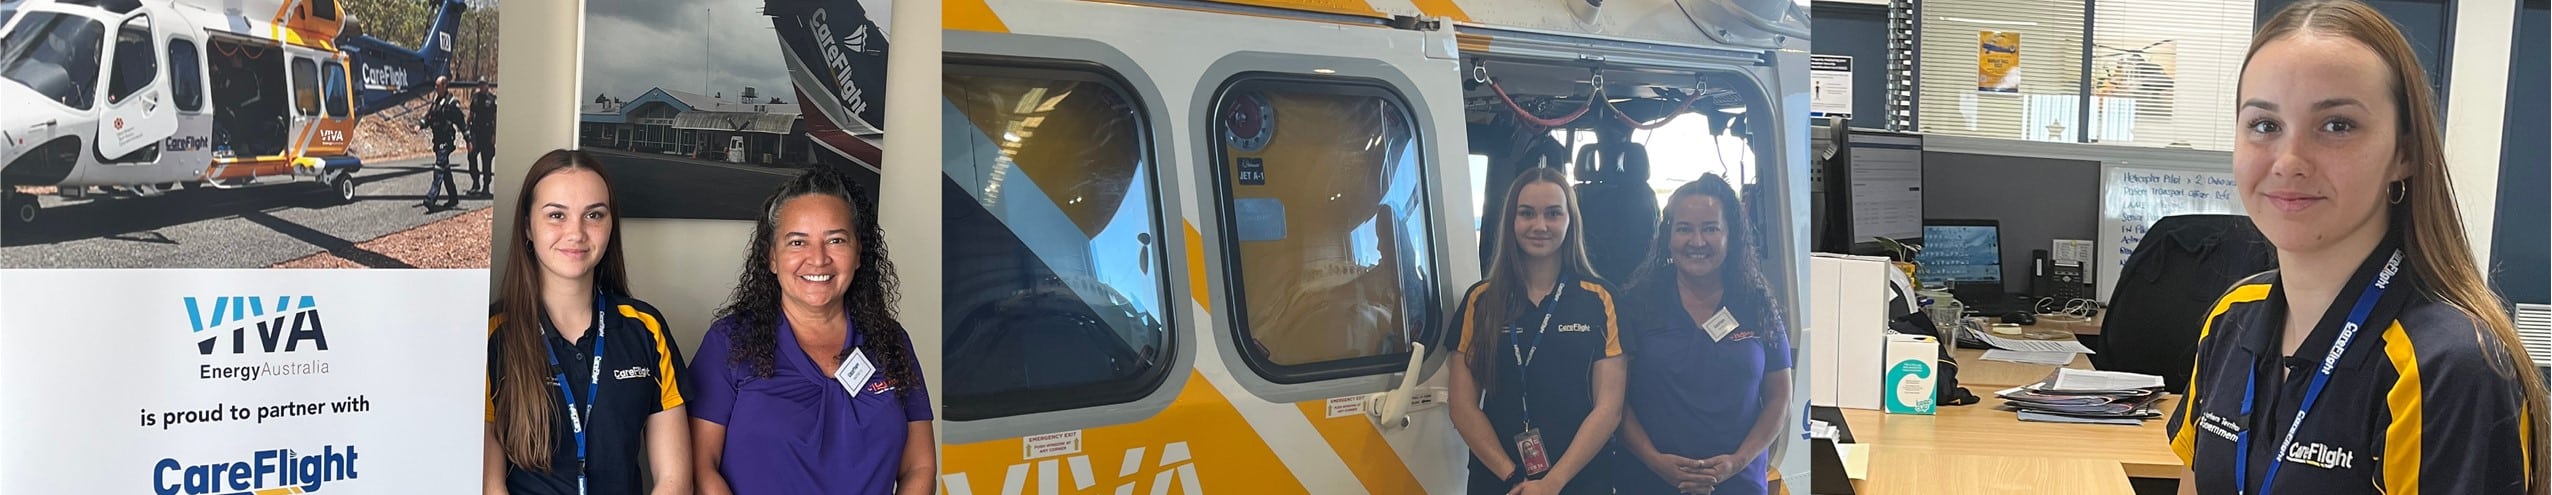 Tanesha reaches for the skies with CareFlight – Viva Energy sponsors First Nations Traineeships